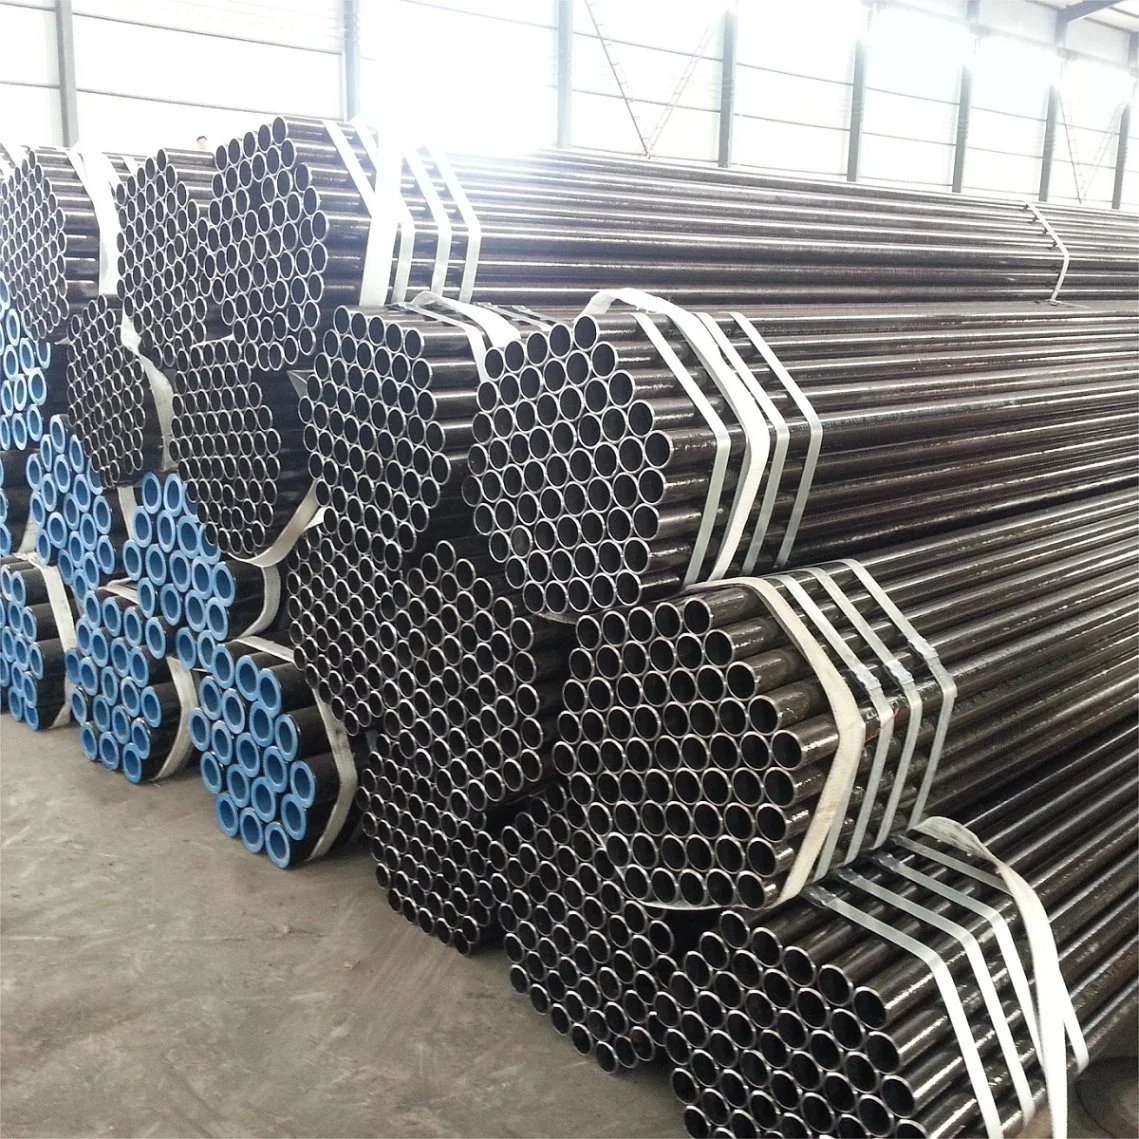 API 5L X42 X52 X56 X60 Steel Pipeline Hot Rolled Seamless Steel Pipe Sch40 Sch80 Sch160 Large Diameter Anti-Corrosion Steel Pipe for Water Oil and Gas